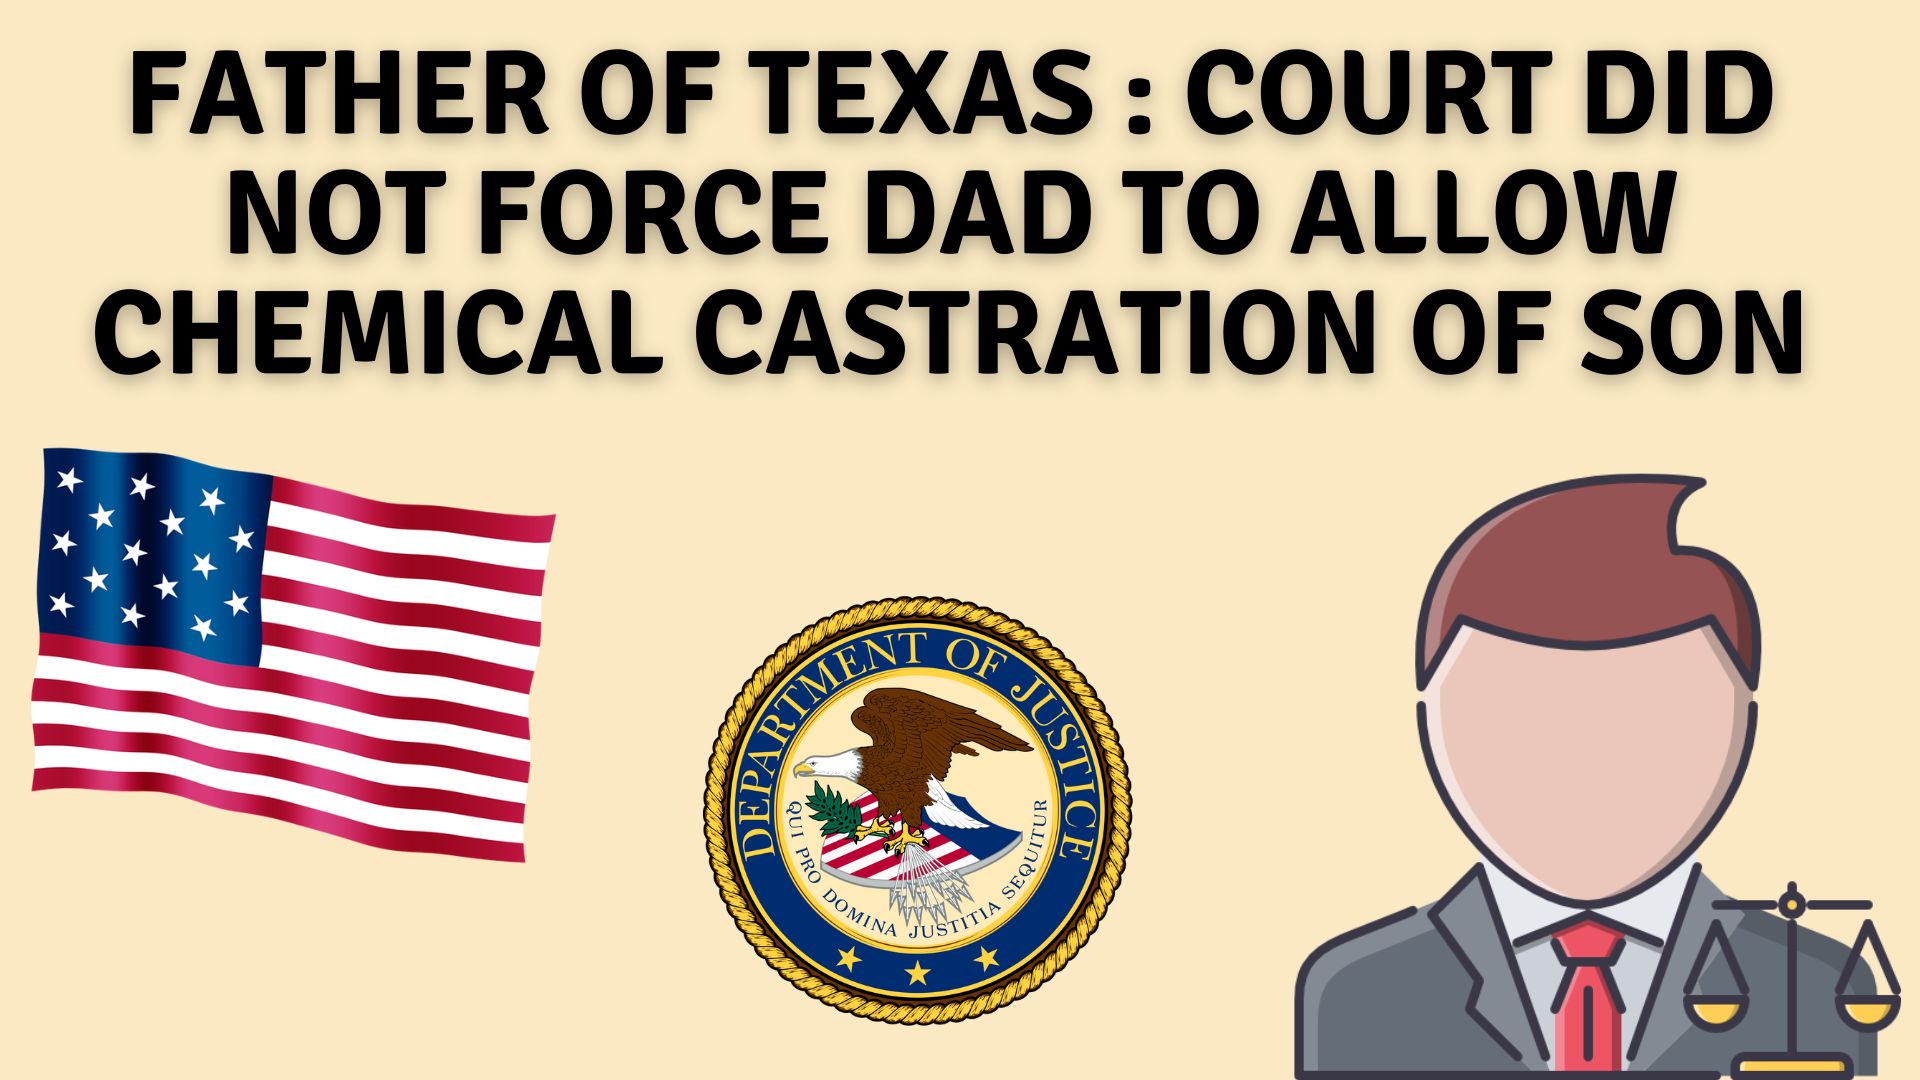 Father of texas : court did not force dad to allow chemical castration of son